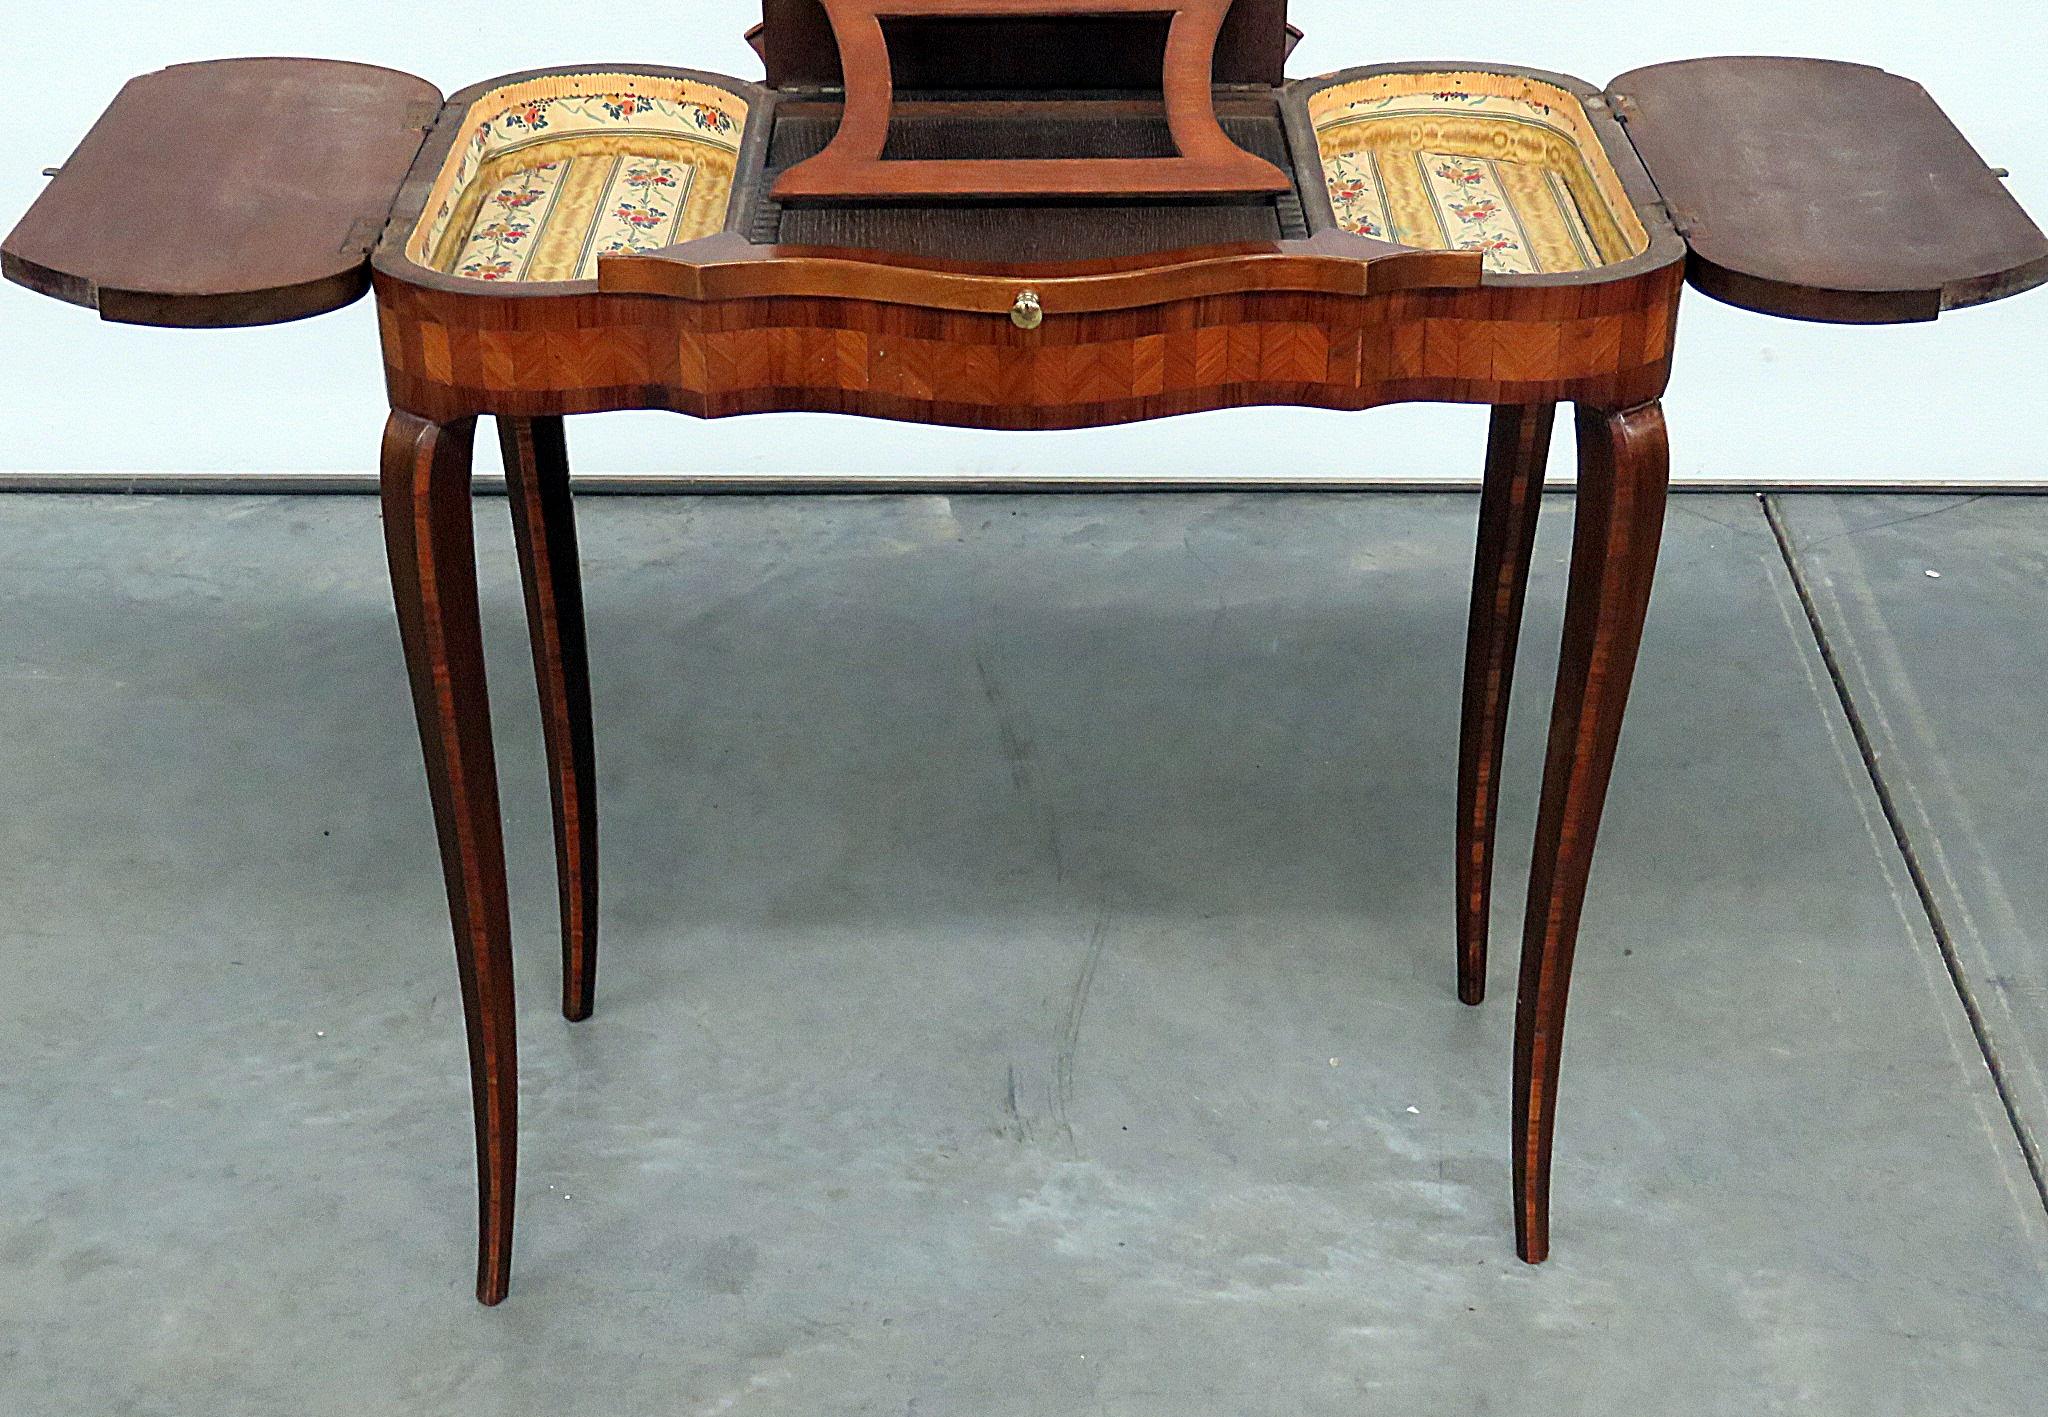 Antique French inlaid ladies desk or ladies vanity with pull up storage and 2 side compartments.